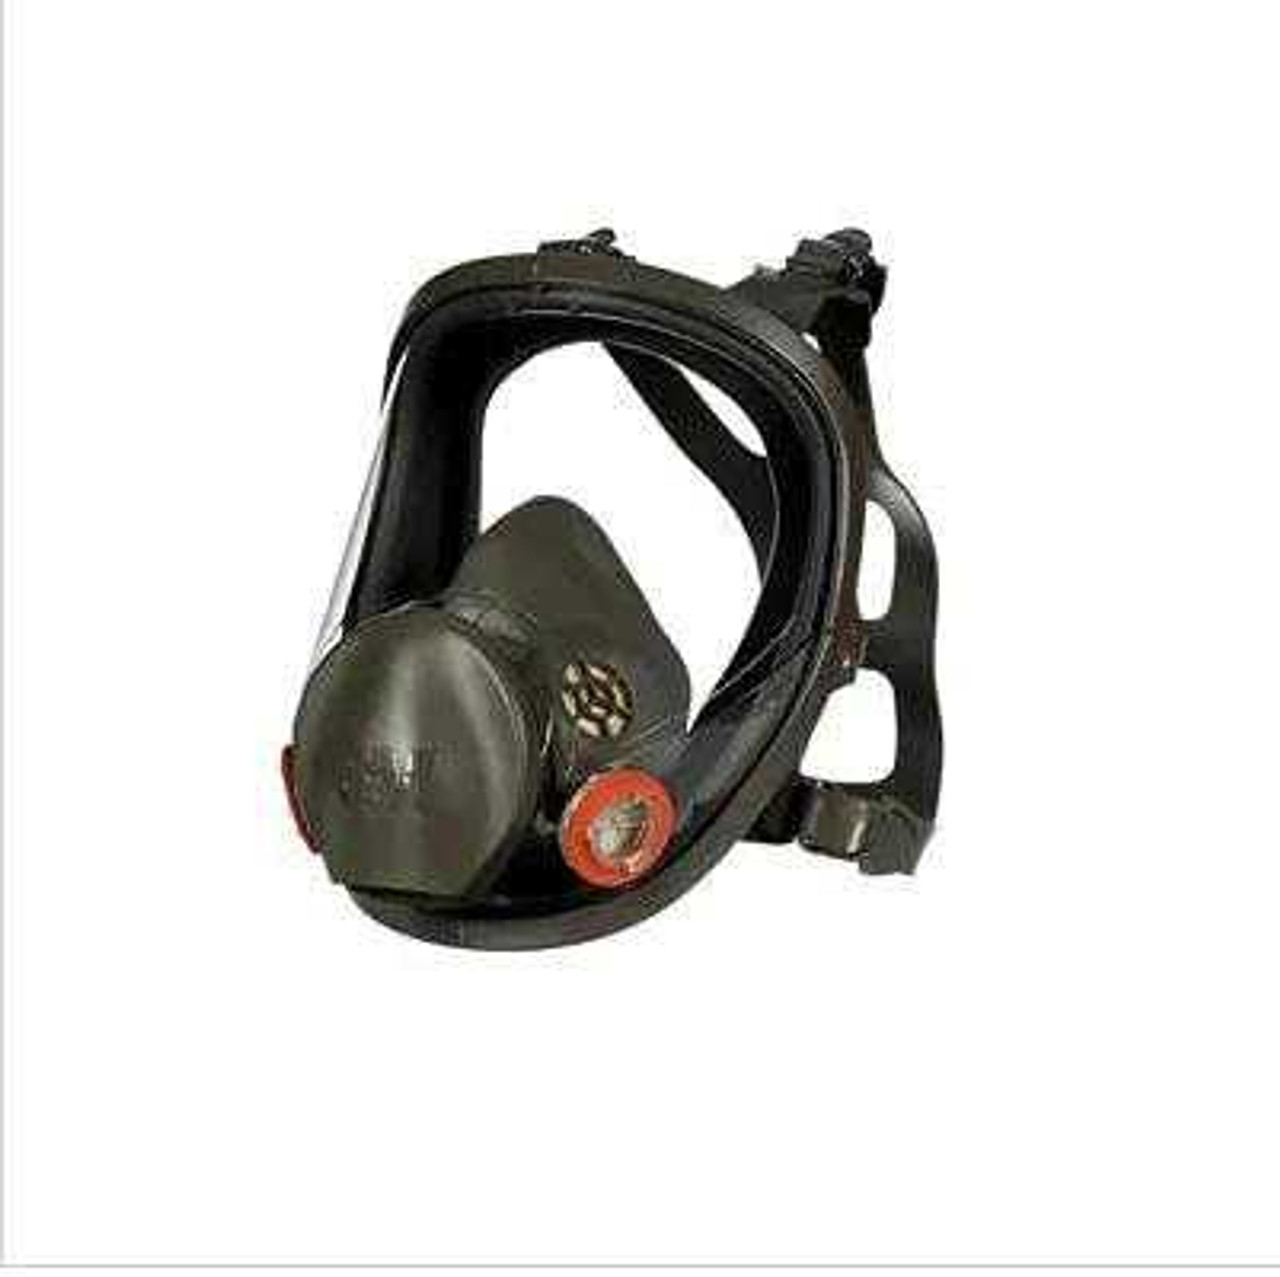 3M Full Face Respirator (Includes Organic Cartridges-Pre-filters-Retainer Clips)